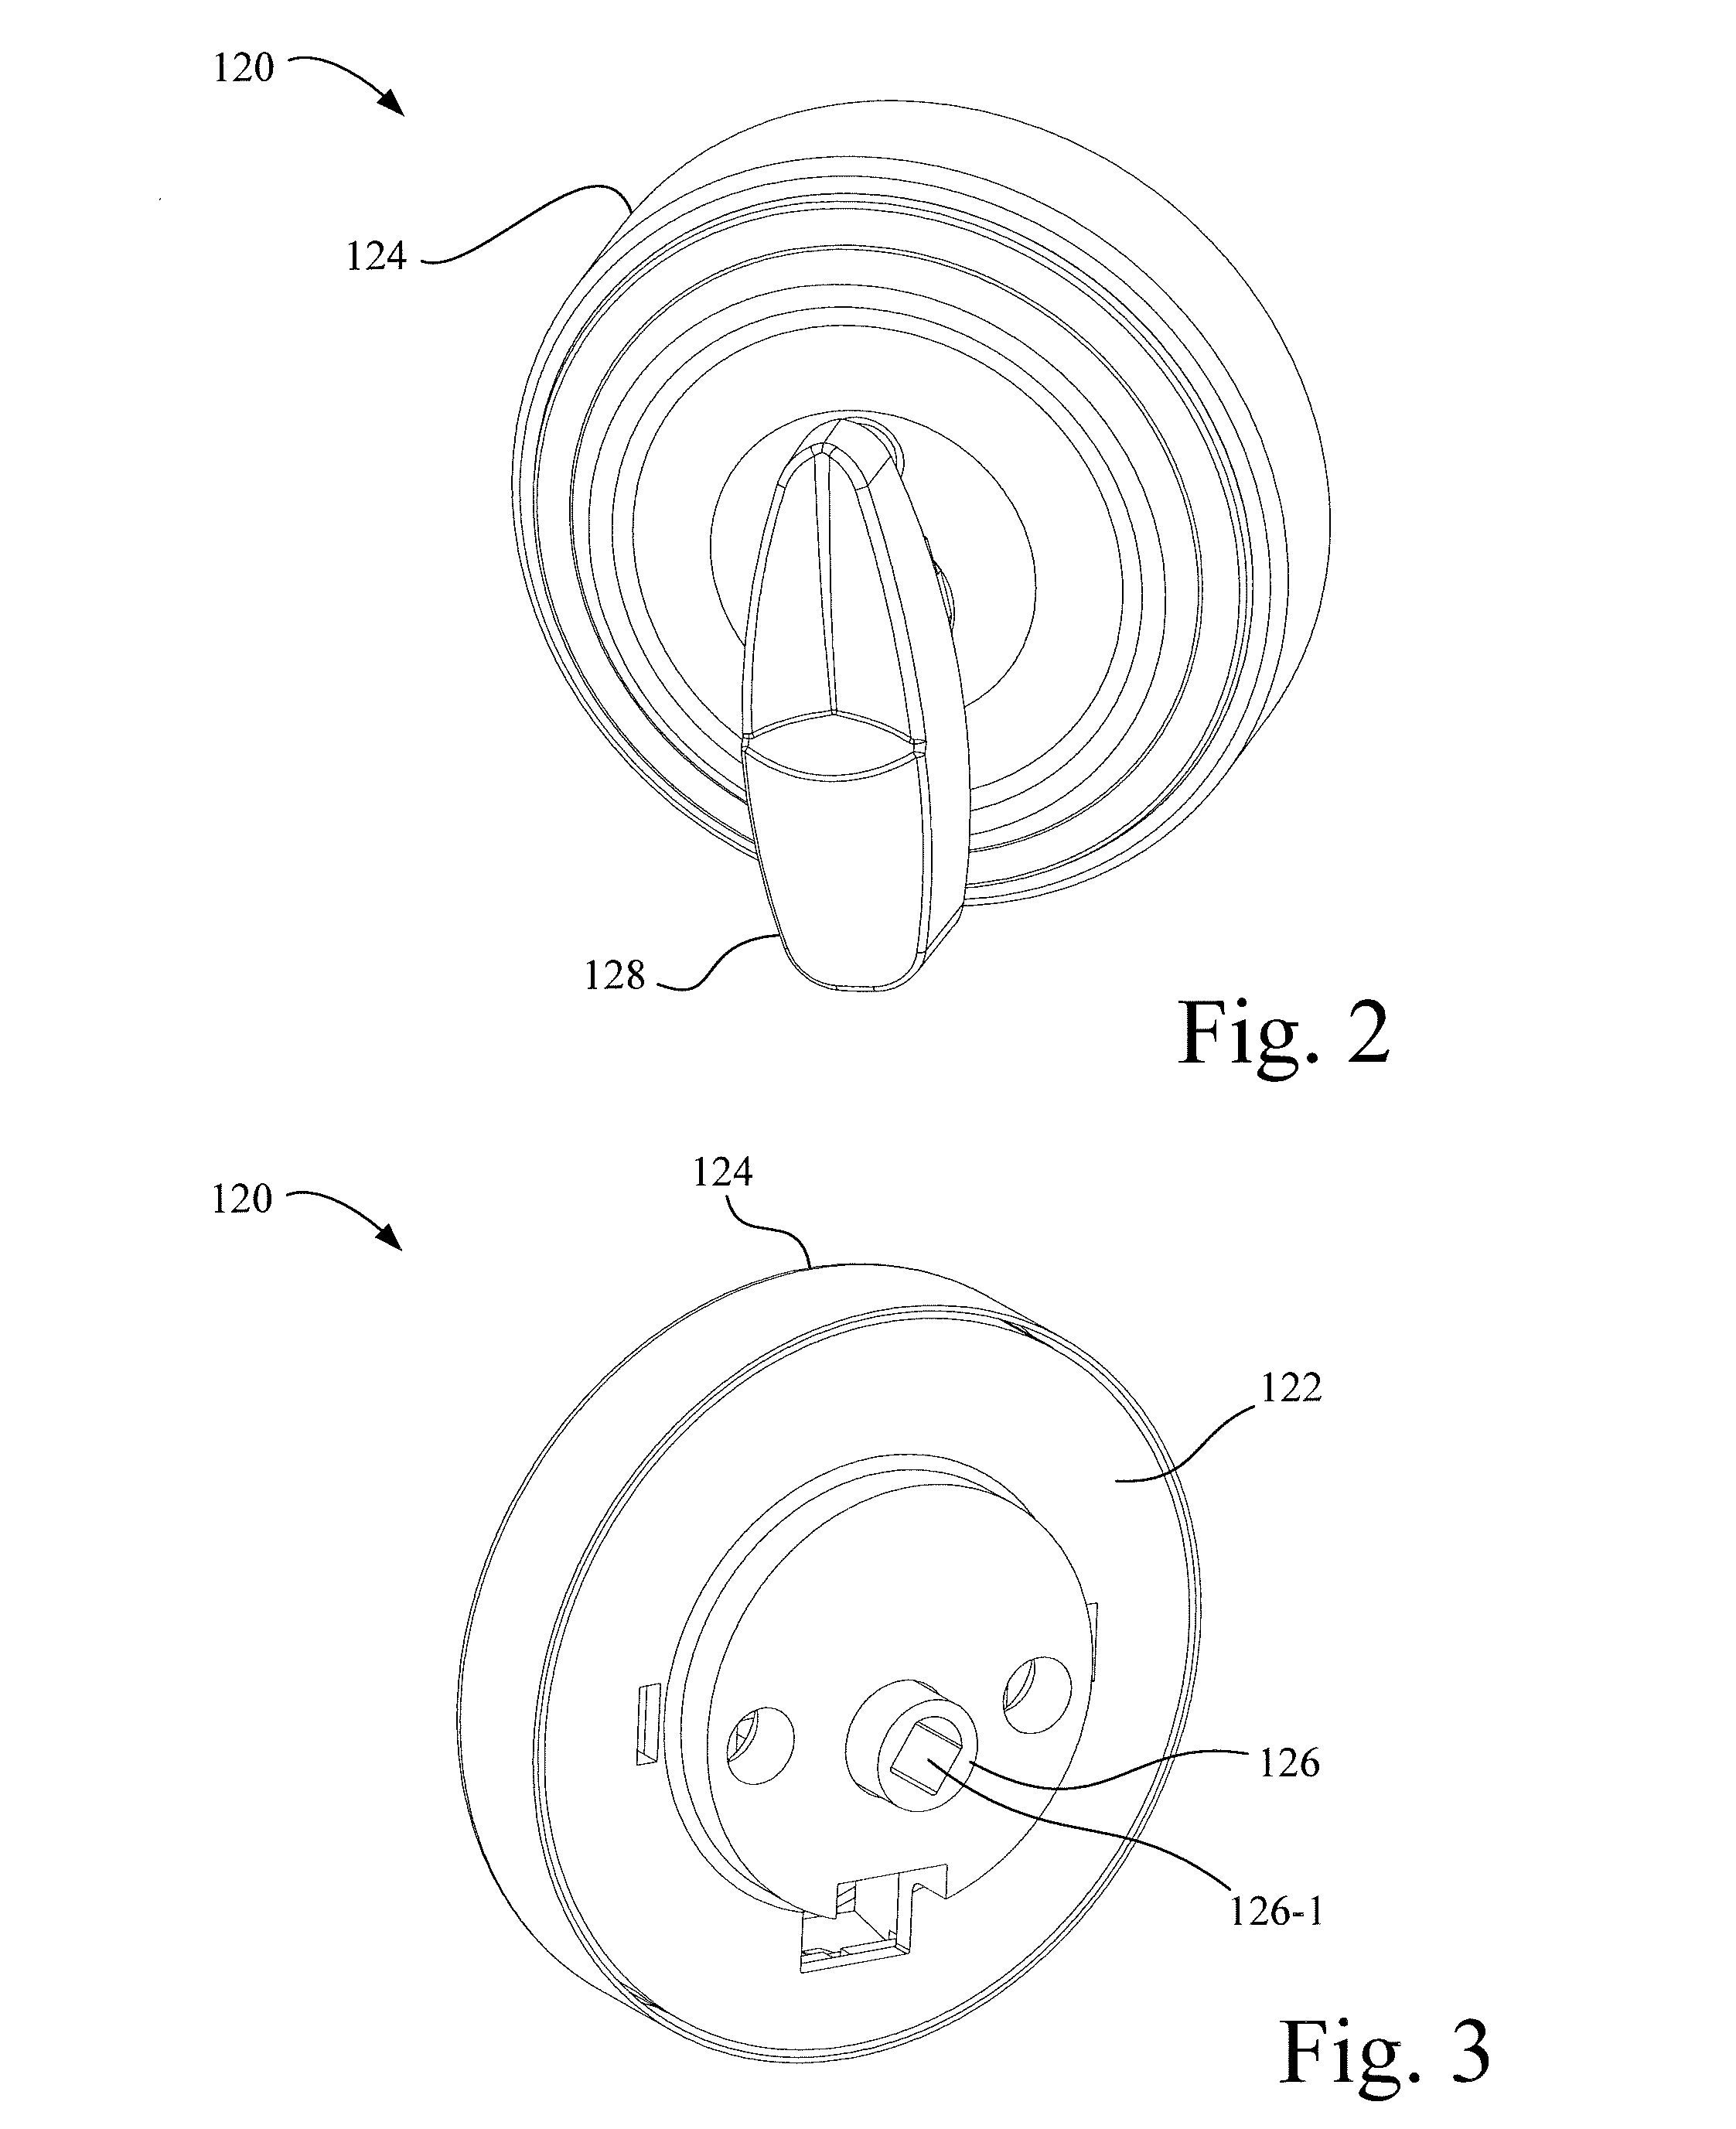 Manually driven electronic deadbolt assembly with free-spinning bezel